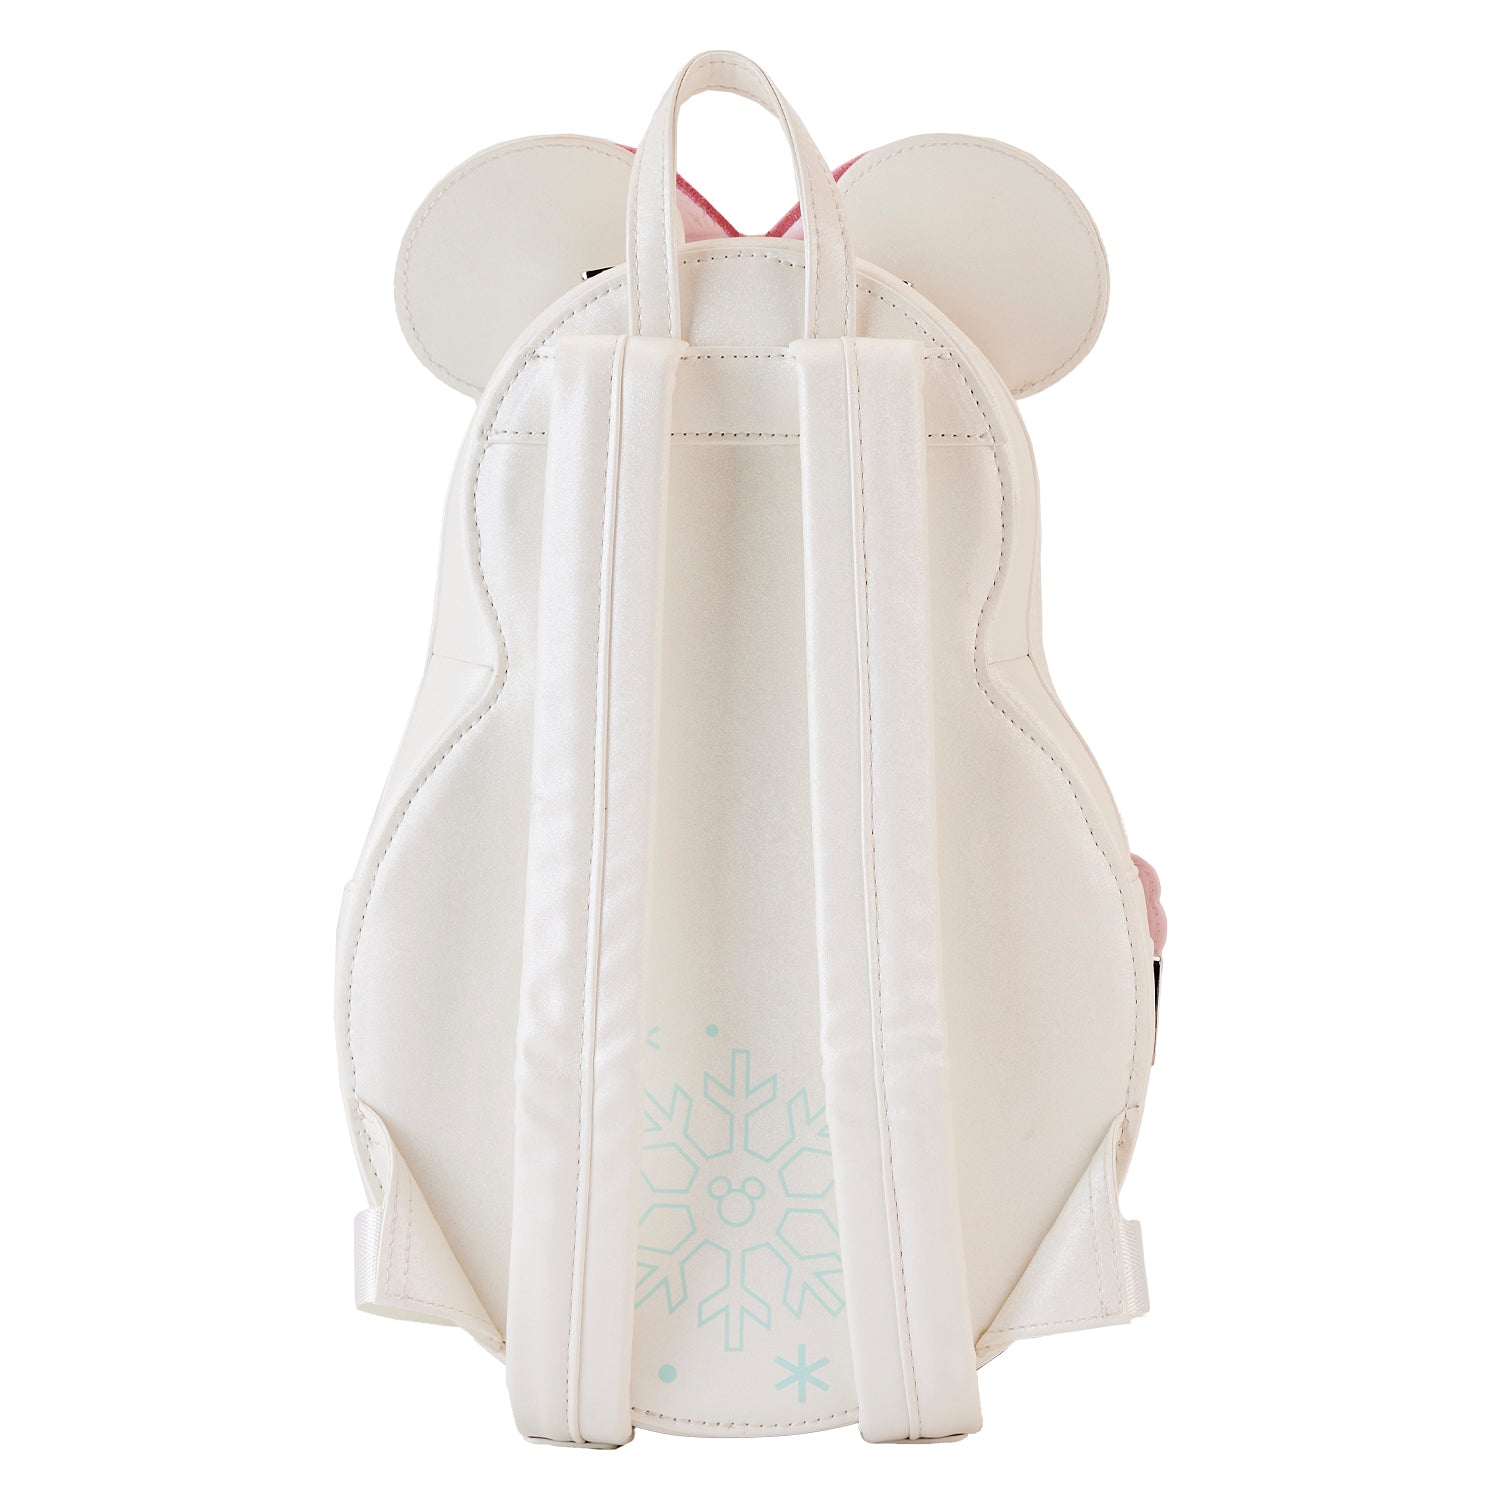 Loungefly Disney Minnie Pastel Snowman Figural Mini Backpack - *PREORDER*